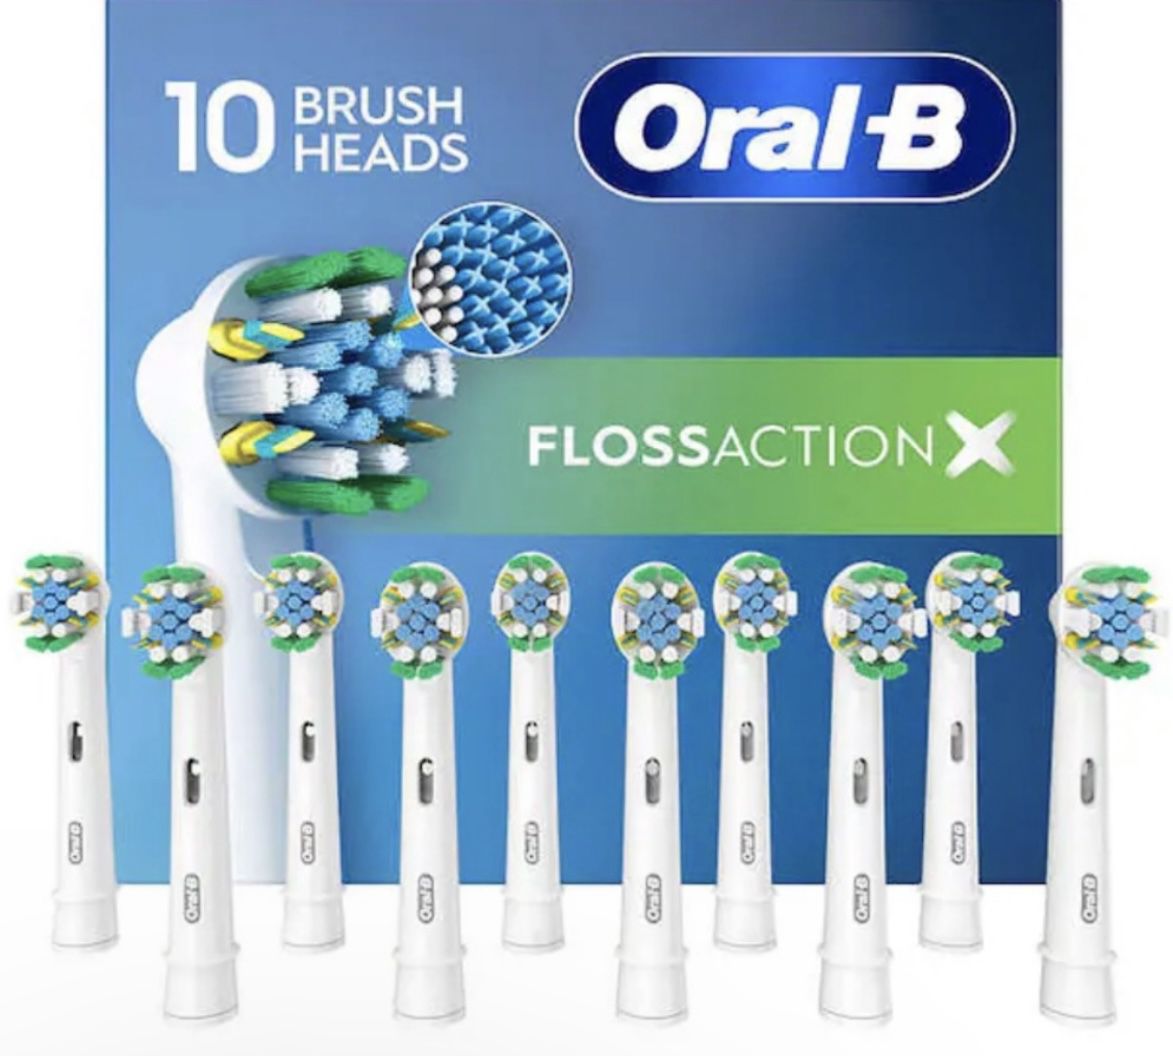  Oral-B Floss Action Replacement Electric Toothbrush Heads, 10-count 